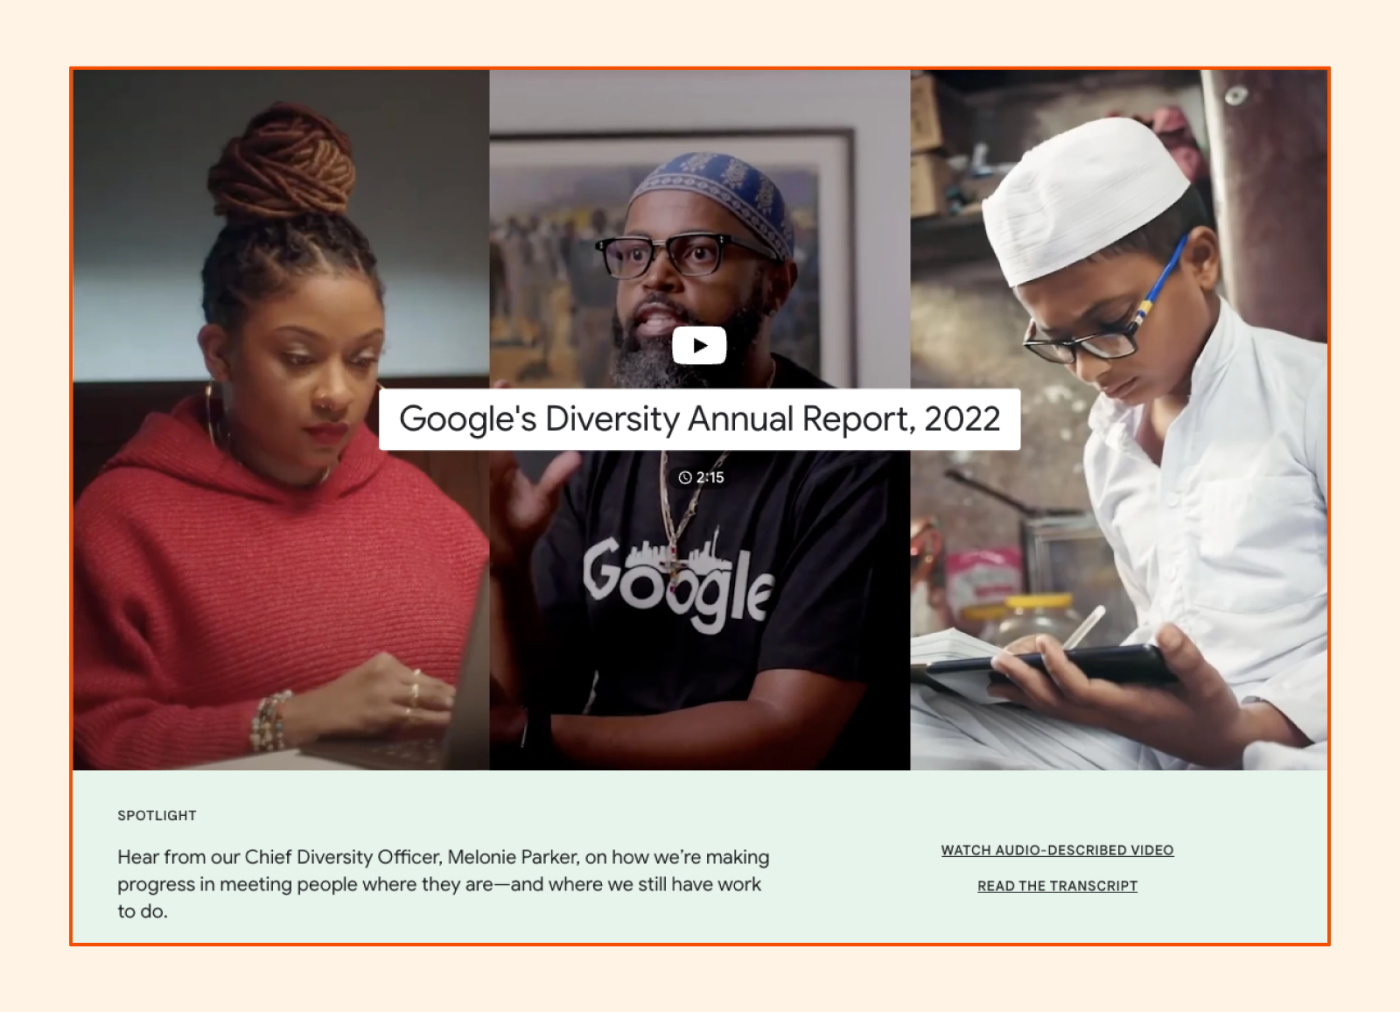 Google's video promoting its Diversity Annual Report for 2022, showing that brands can use unique elements in their reports